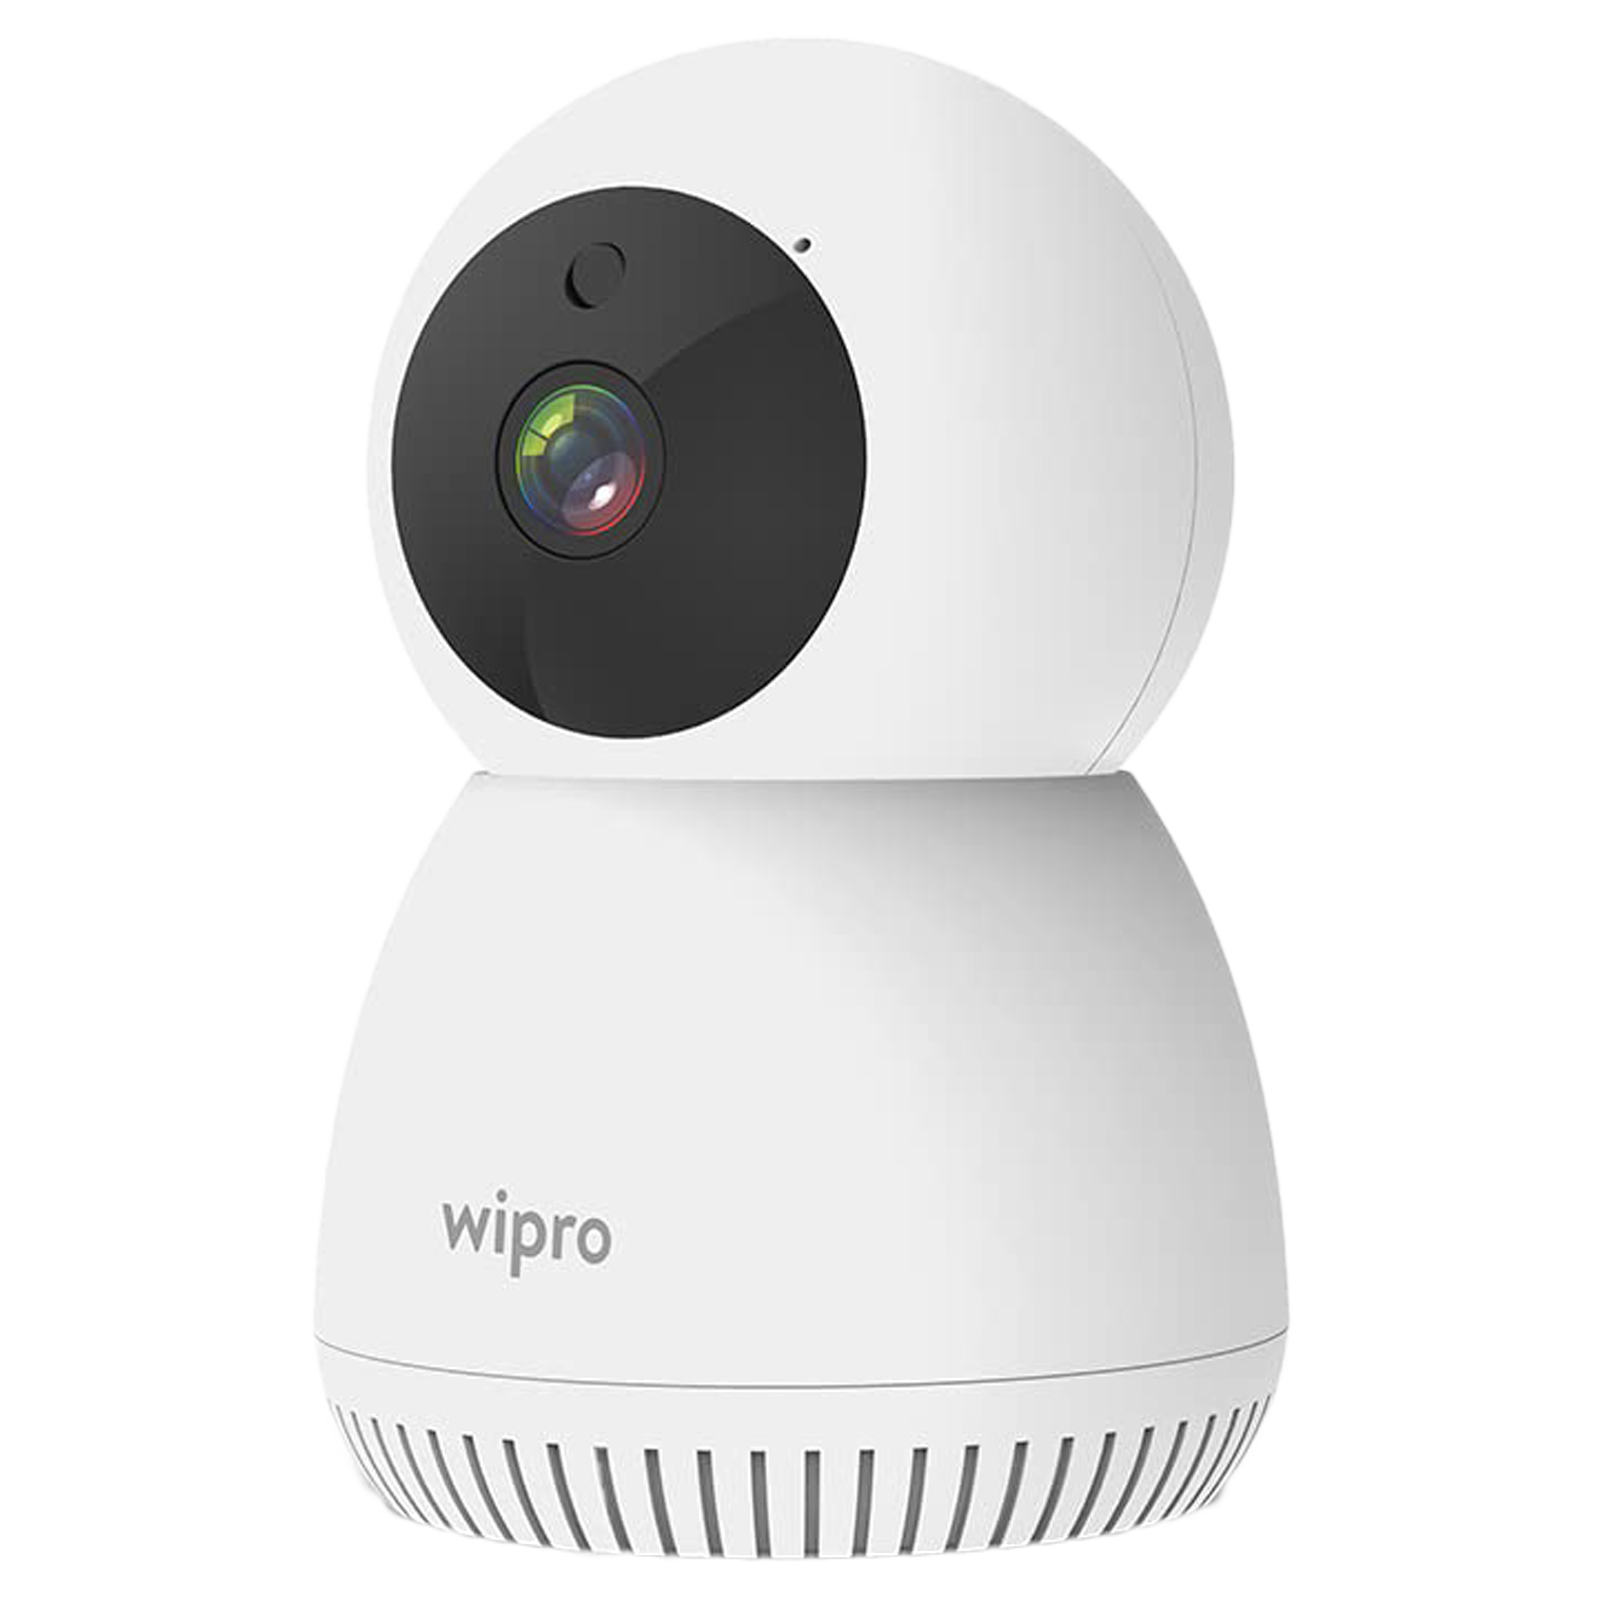 Wipro Smart CCTV Security Camera (Infrared Night Vision, DC11080, White)